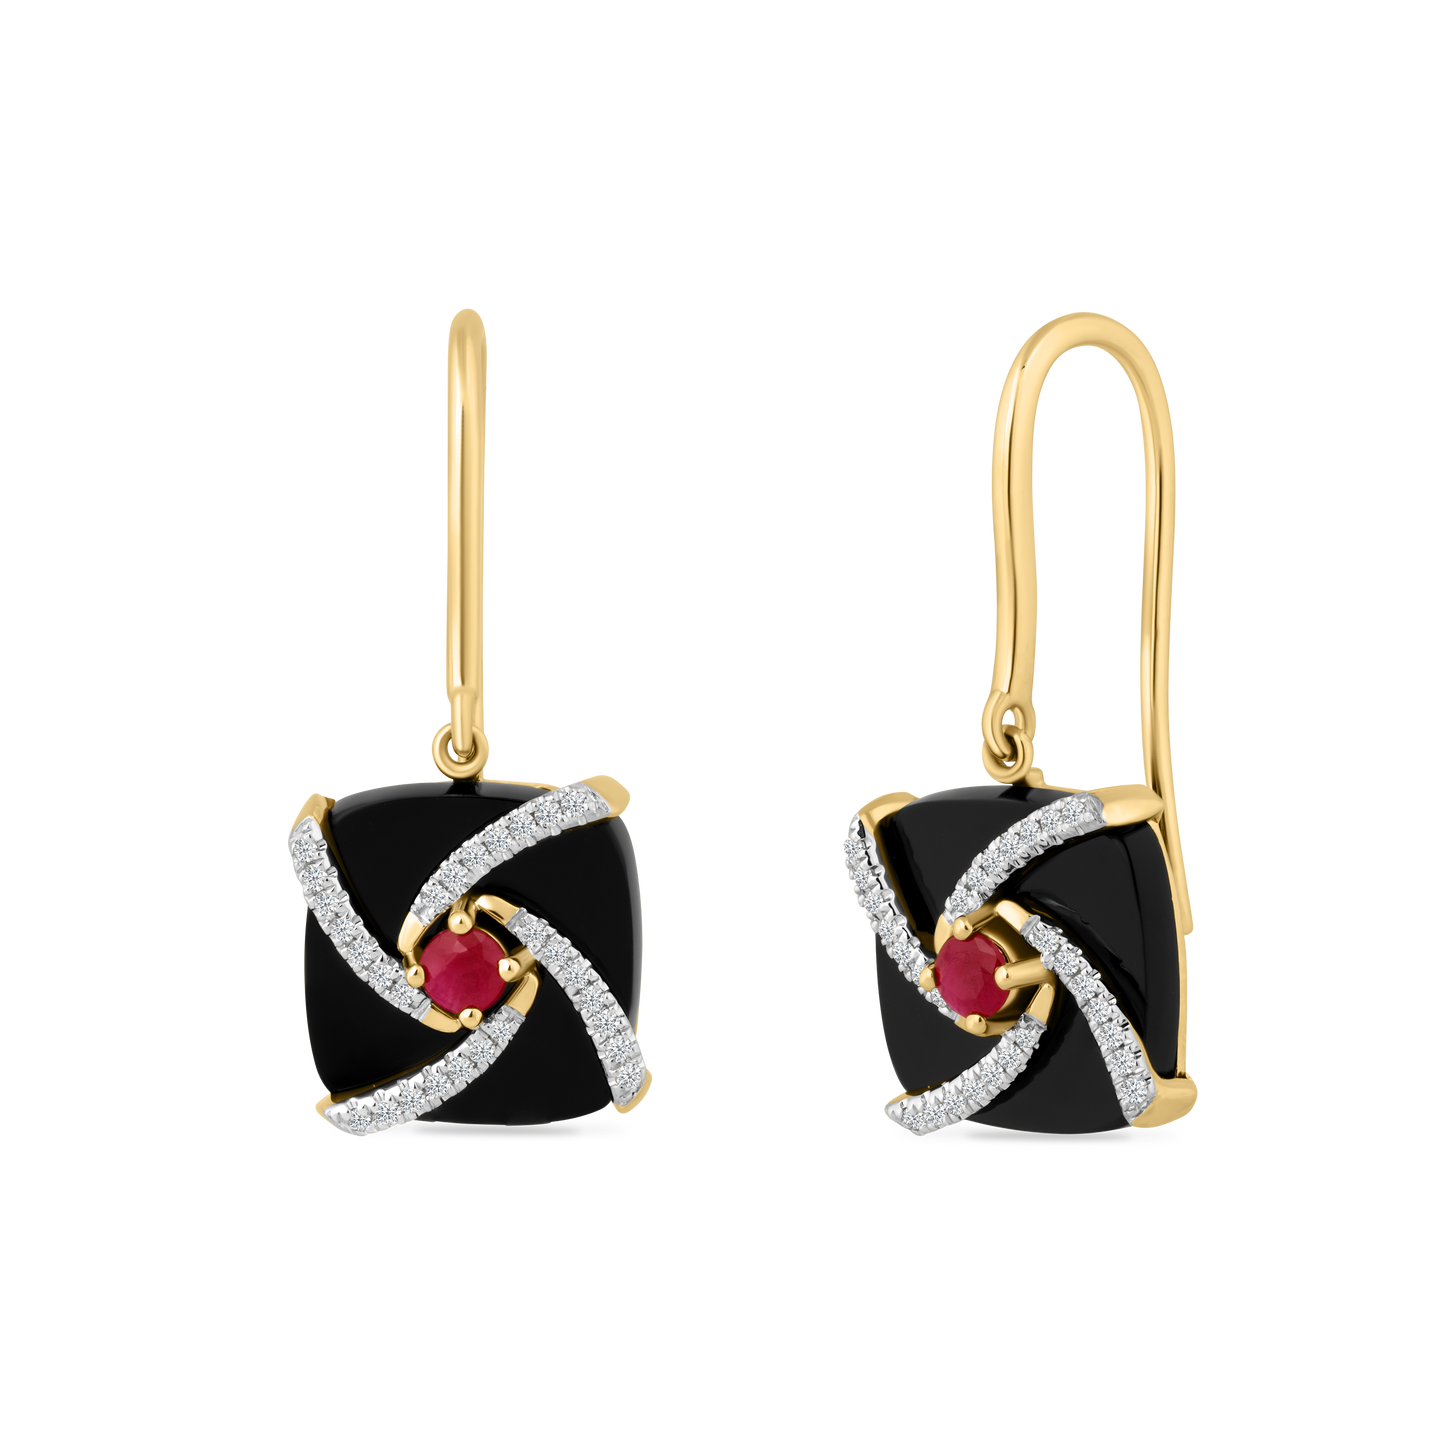 14K BLACK AGATE EARRINGS WITH 56 DIAMONDS 0.19CT AND 2 RUBIES 0.3CT